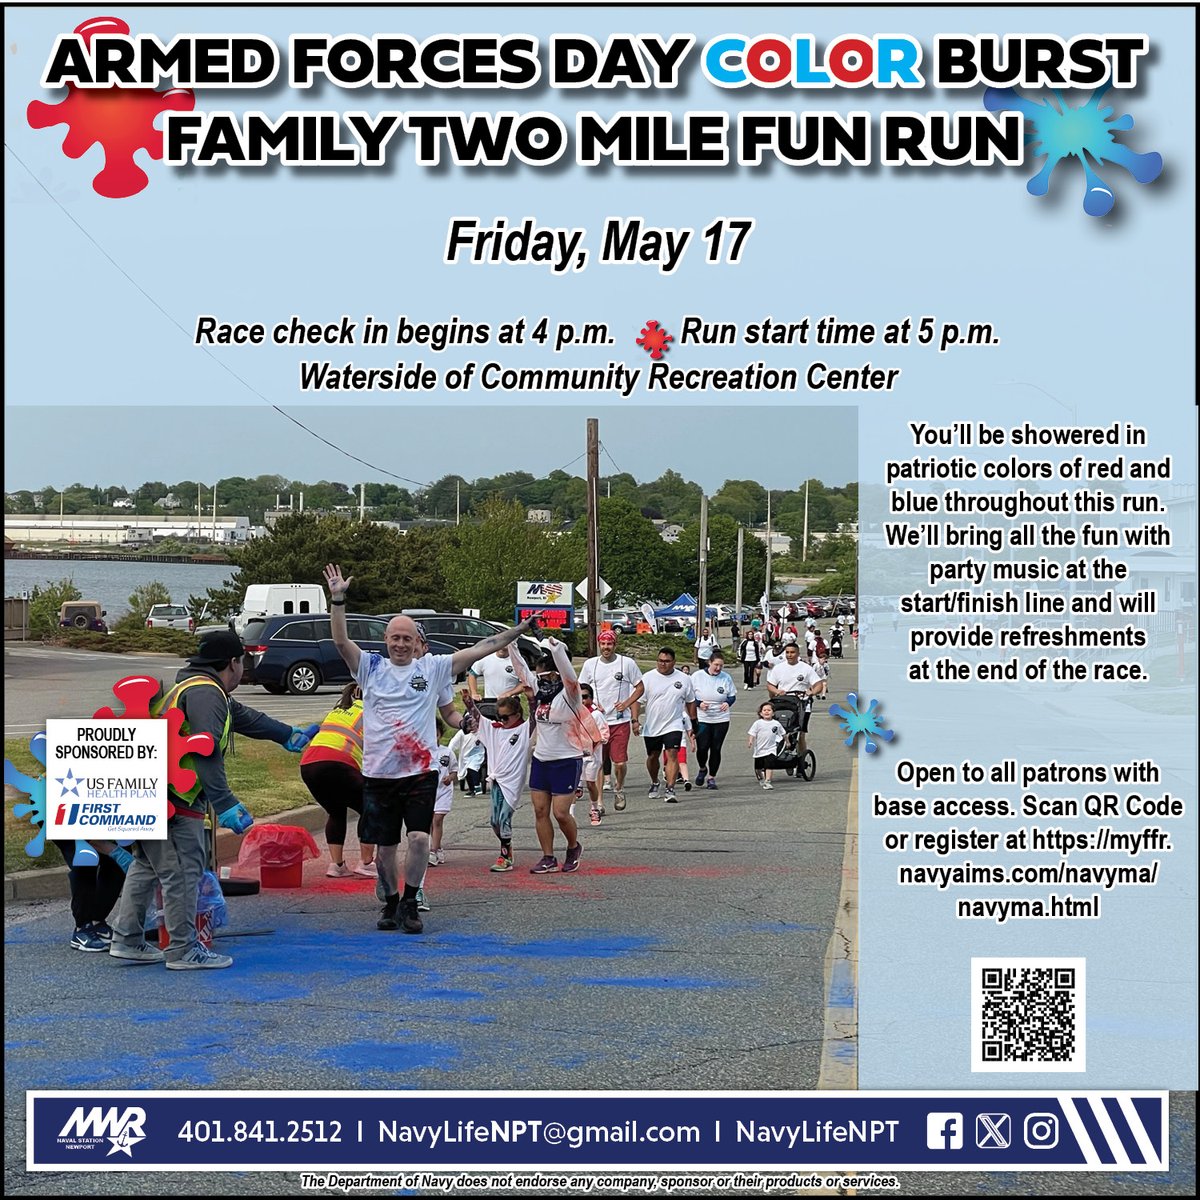 Armed Forces Day Color Burst Family Two-mile Fun Run Fri, 5/17. Race check-in begins 4 p.m., run starts 5 p.m.
Waterside of Community Rec Ctr, Bldg 656. Open to all patrons with base access. Register at myffr.navyaims.com/navyma/navyma.….
#familyrun #colorrun #Militaryfamily #NavyFitness